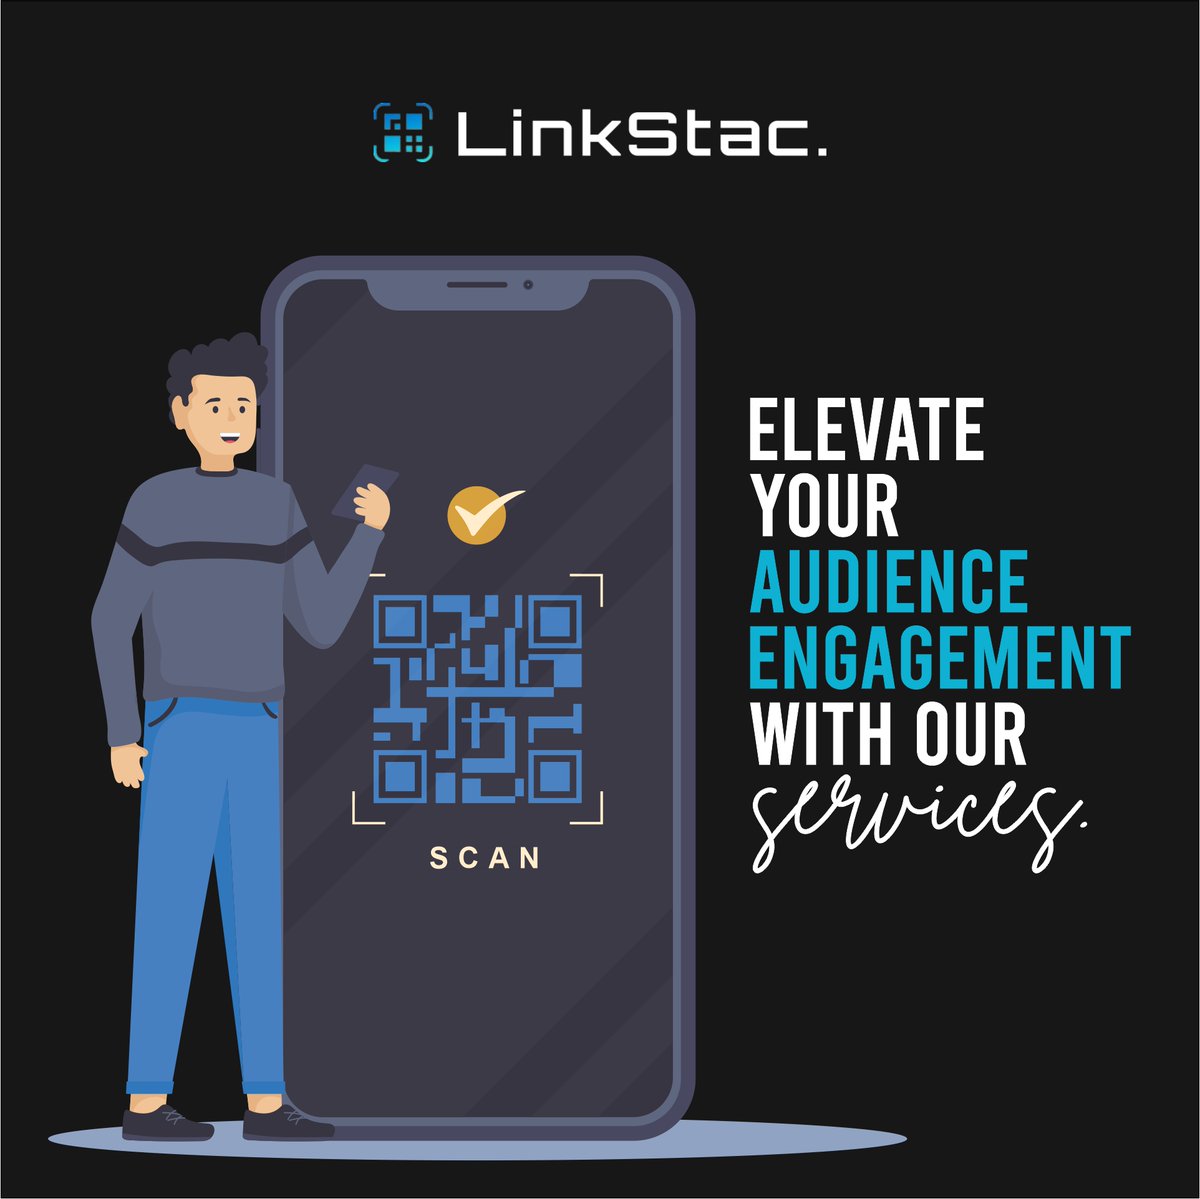 Tired of QR codes that don't deliver? Say goodbye to disconnect and hello to engagement! 🚀 Let us revolutionize your QR code strategy and keep your audience hooked. 
.
.
.
.
#QRRevolution
#EngageWithQR
#QRStrategy
#InteractiveQR
#QRCodeEngagement